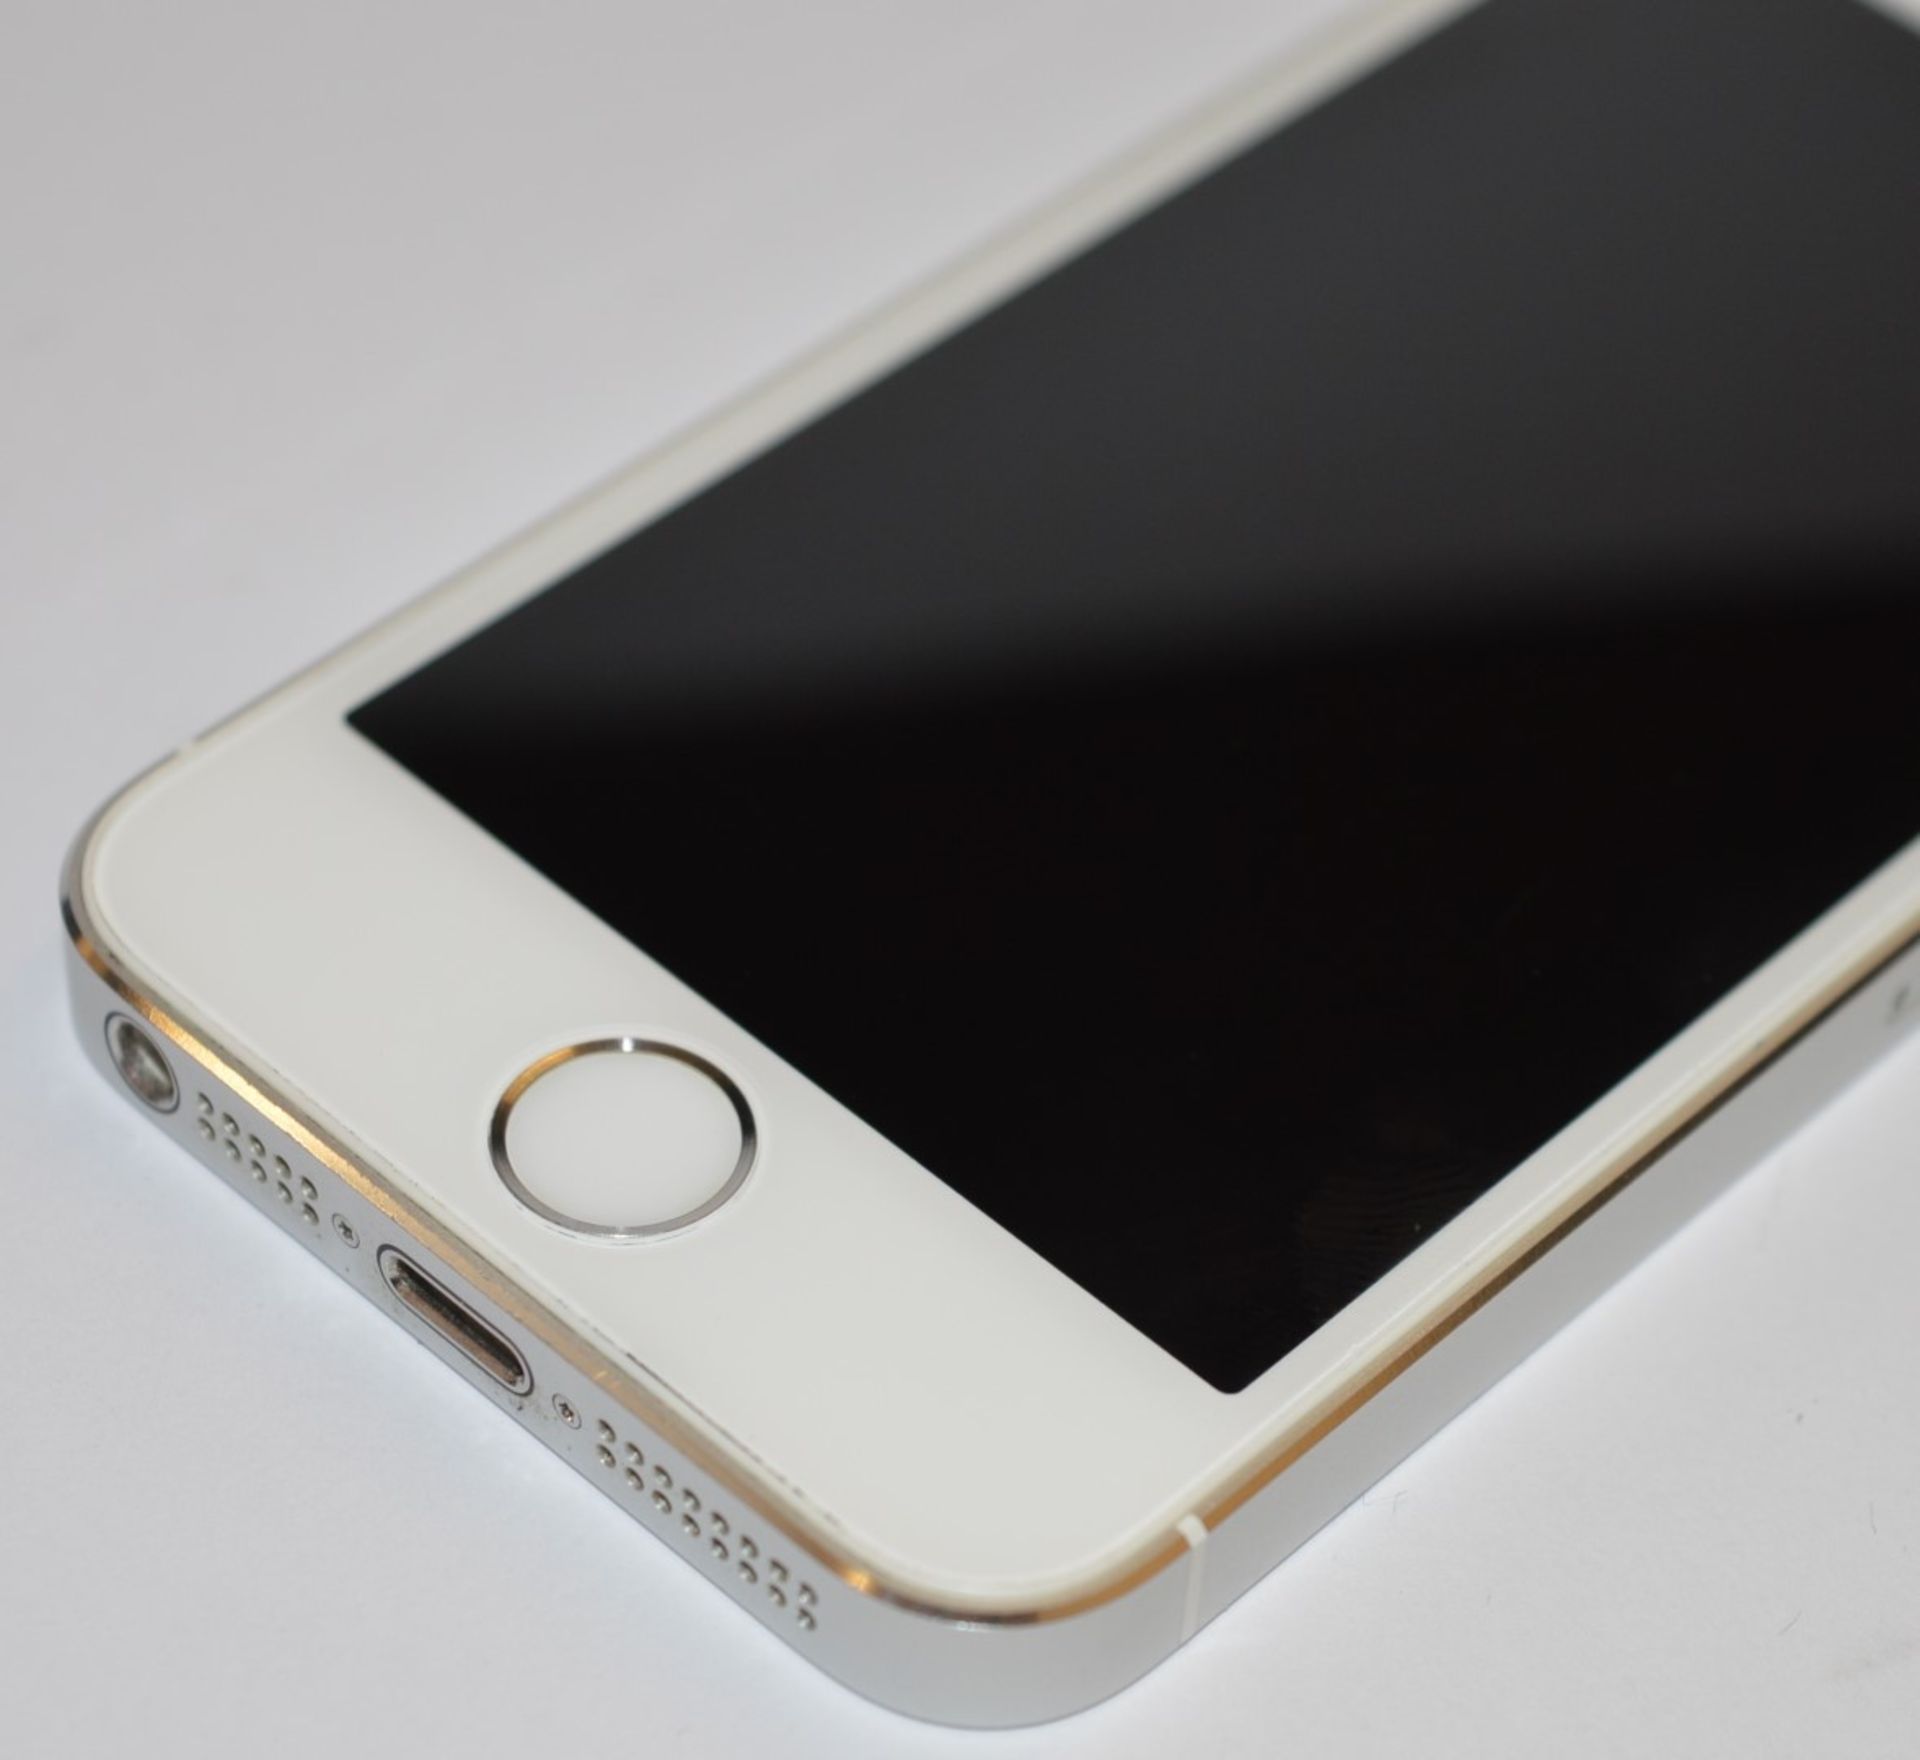 1 x Apple Iphone 5S White 32gb Mobile Phone - Model A1457 - Excellent Cosmetic Condition - Good - Image 10 of 15